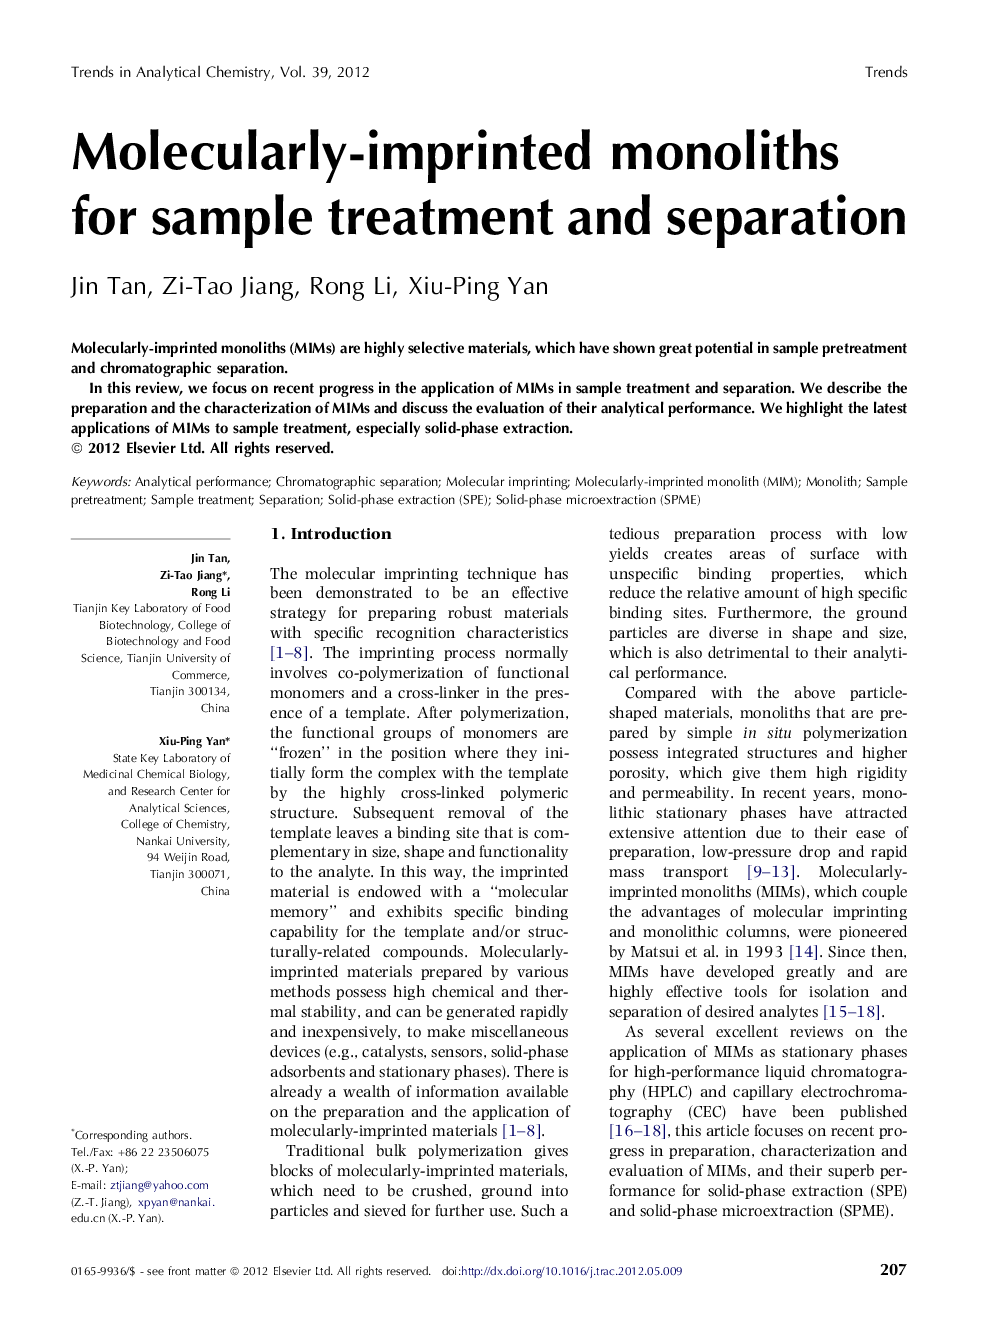 Molecularly-imprinted monoliths for sample treatment and separation